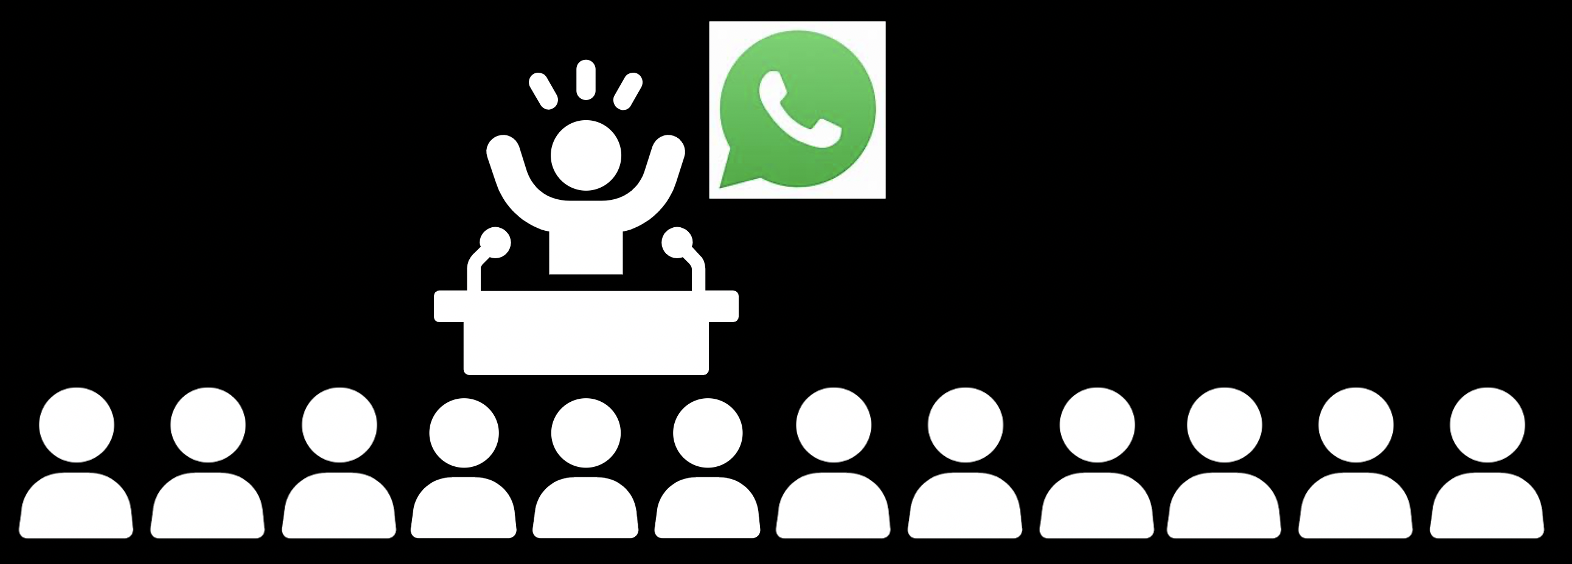 Personalize your campaign WhatsApp messages with Tell Them.